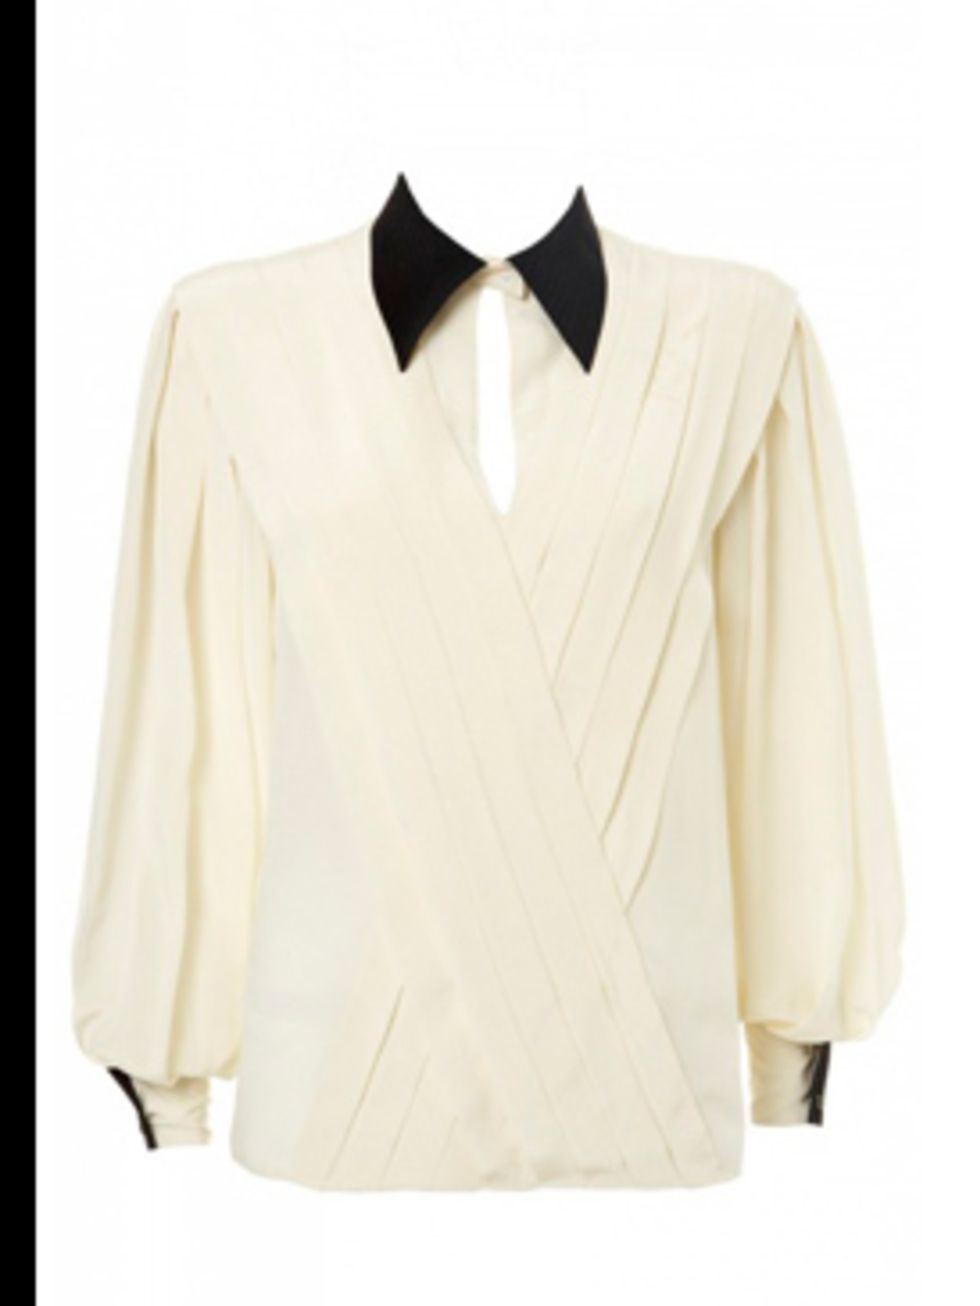 <p>Shirt, £35.00 from Topshop. For stockists call 0845 121 4519</p>